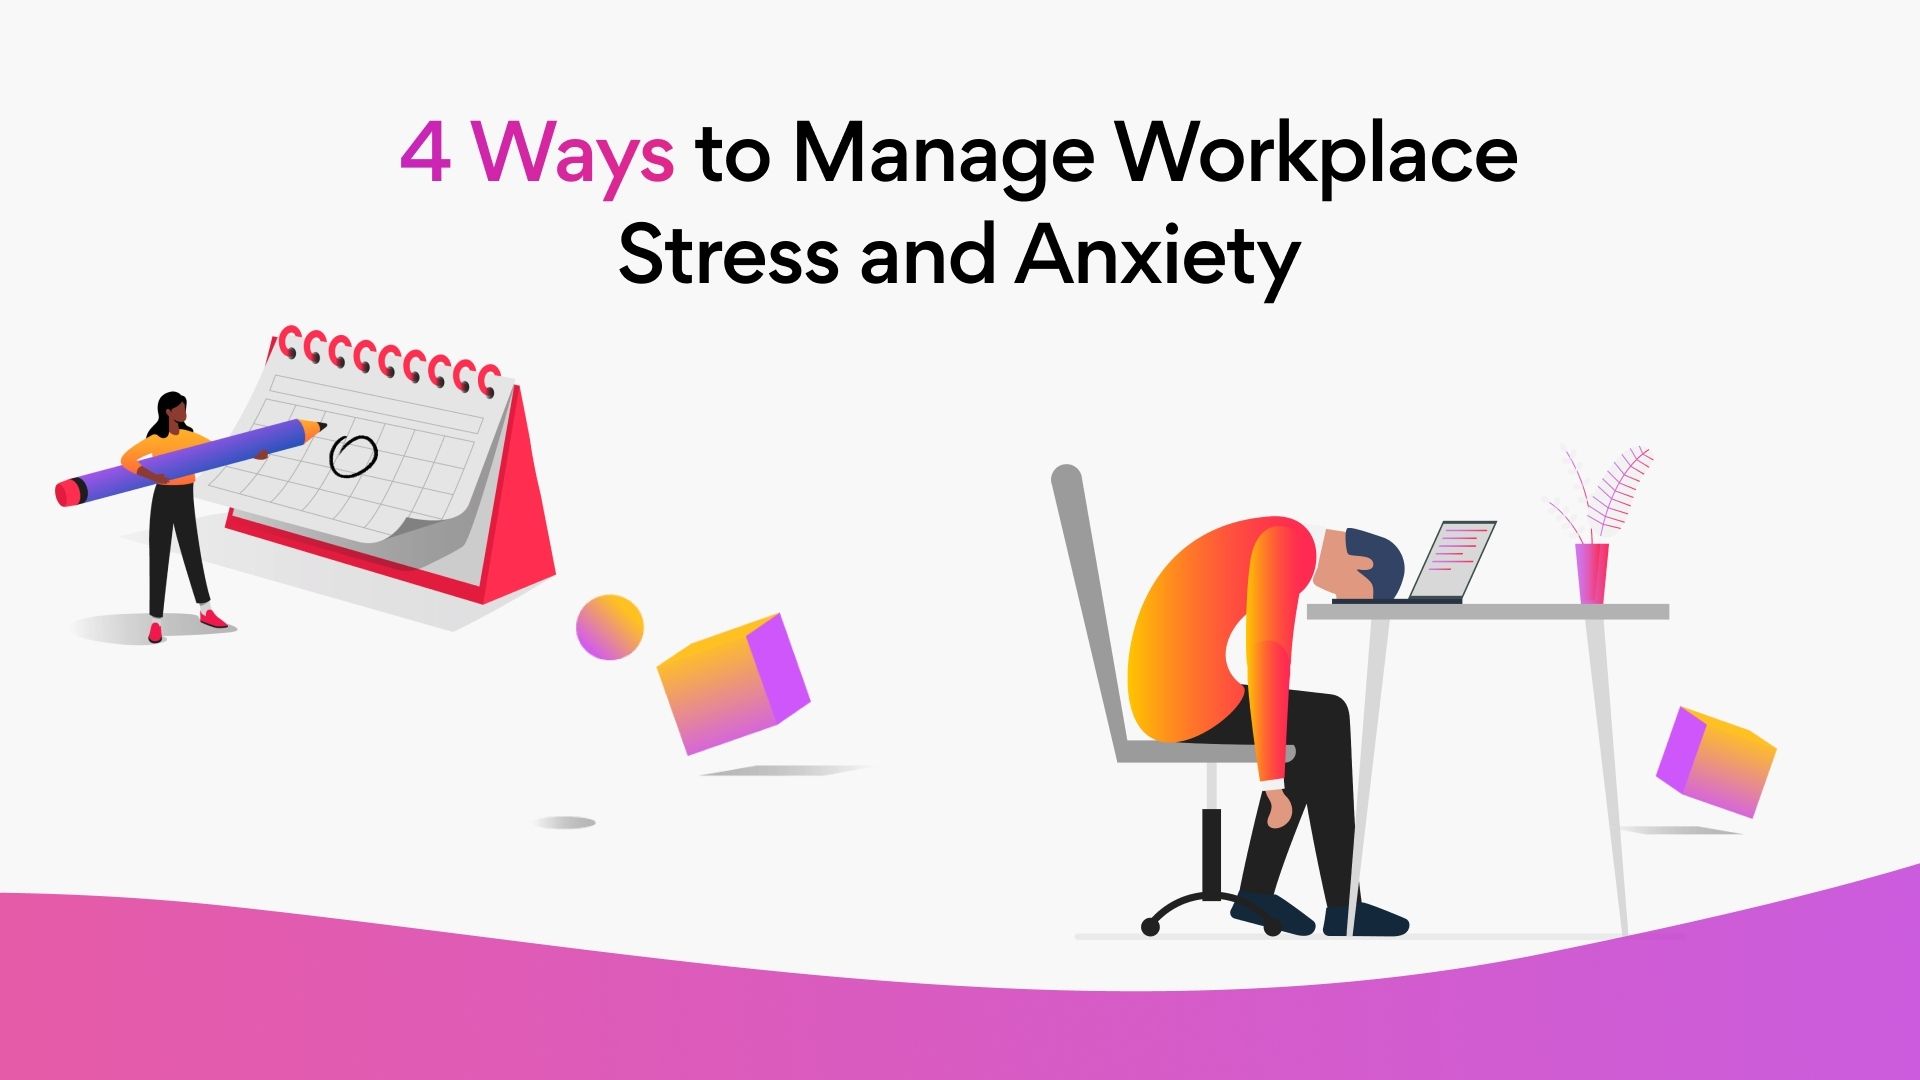 Work place stress and anxiety